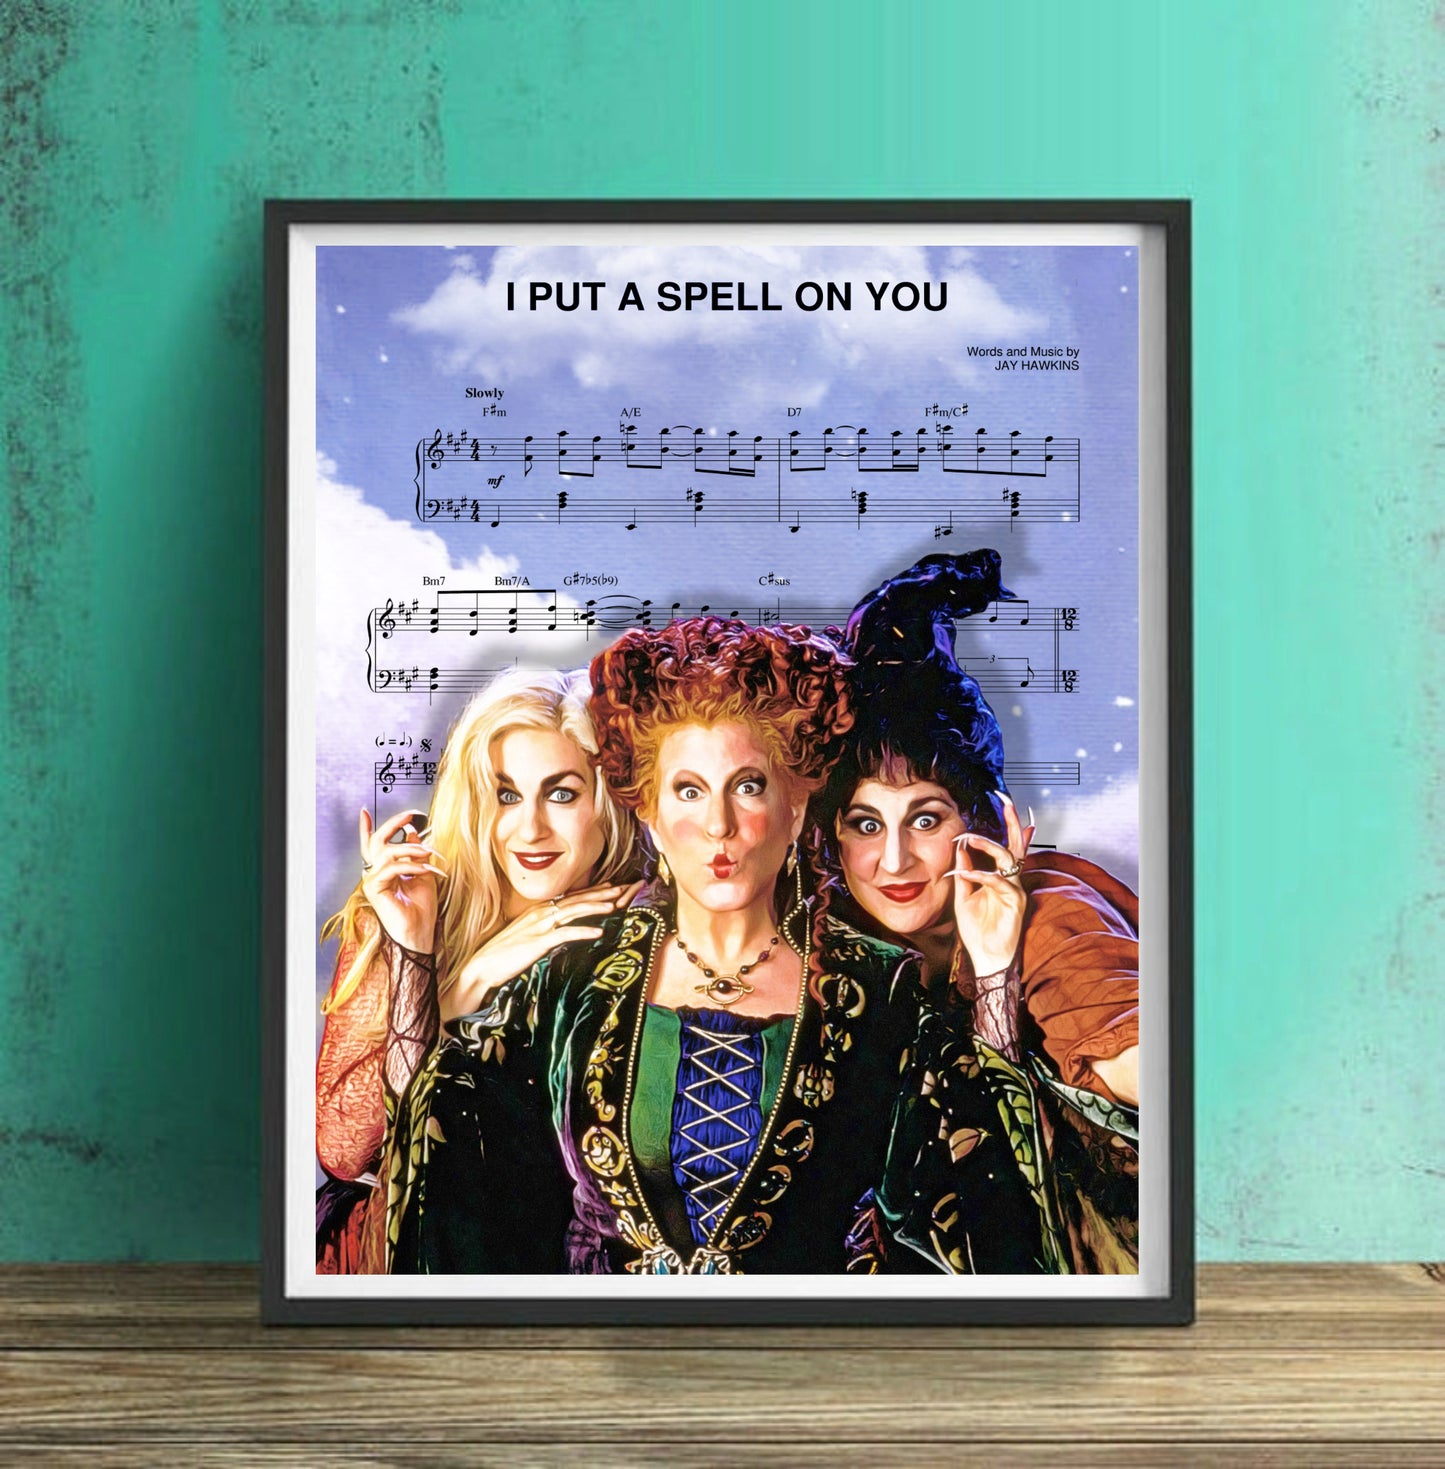 I put a spell on you sheet music from hocus pocus